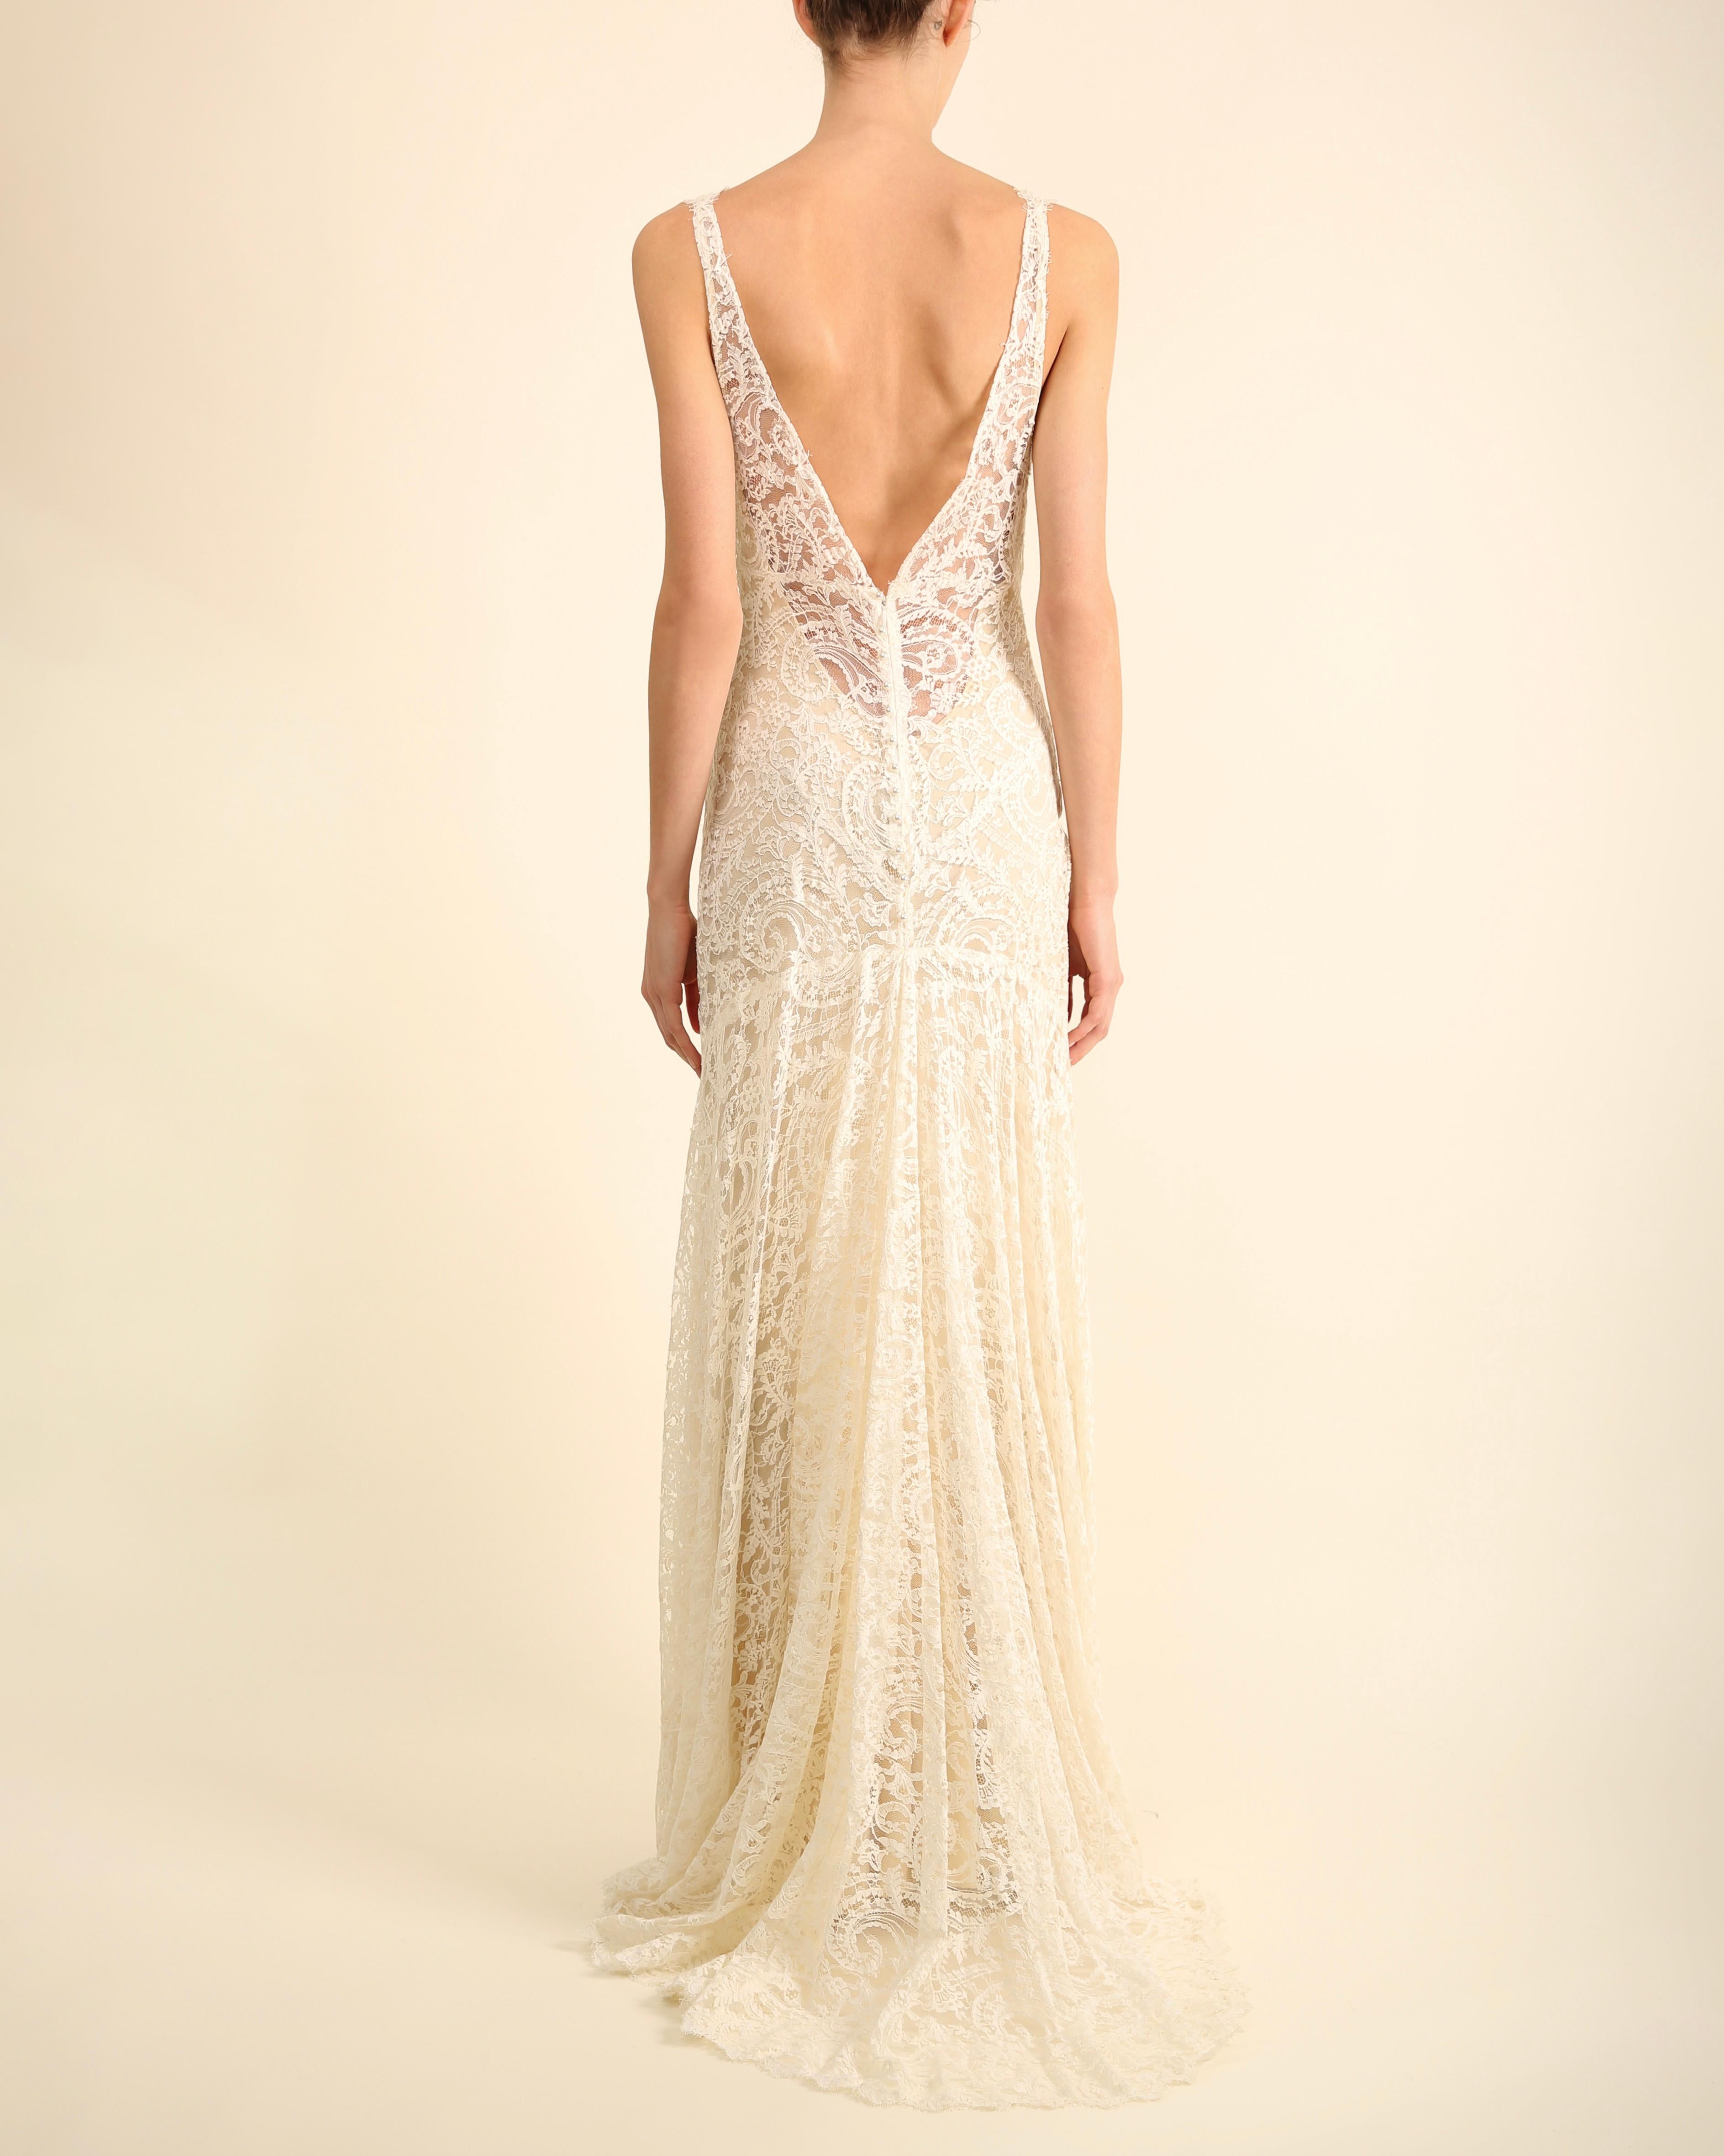 Monique Lhuillier ivory lace plunging backless wedding gown with train dress  13